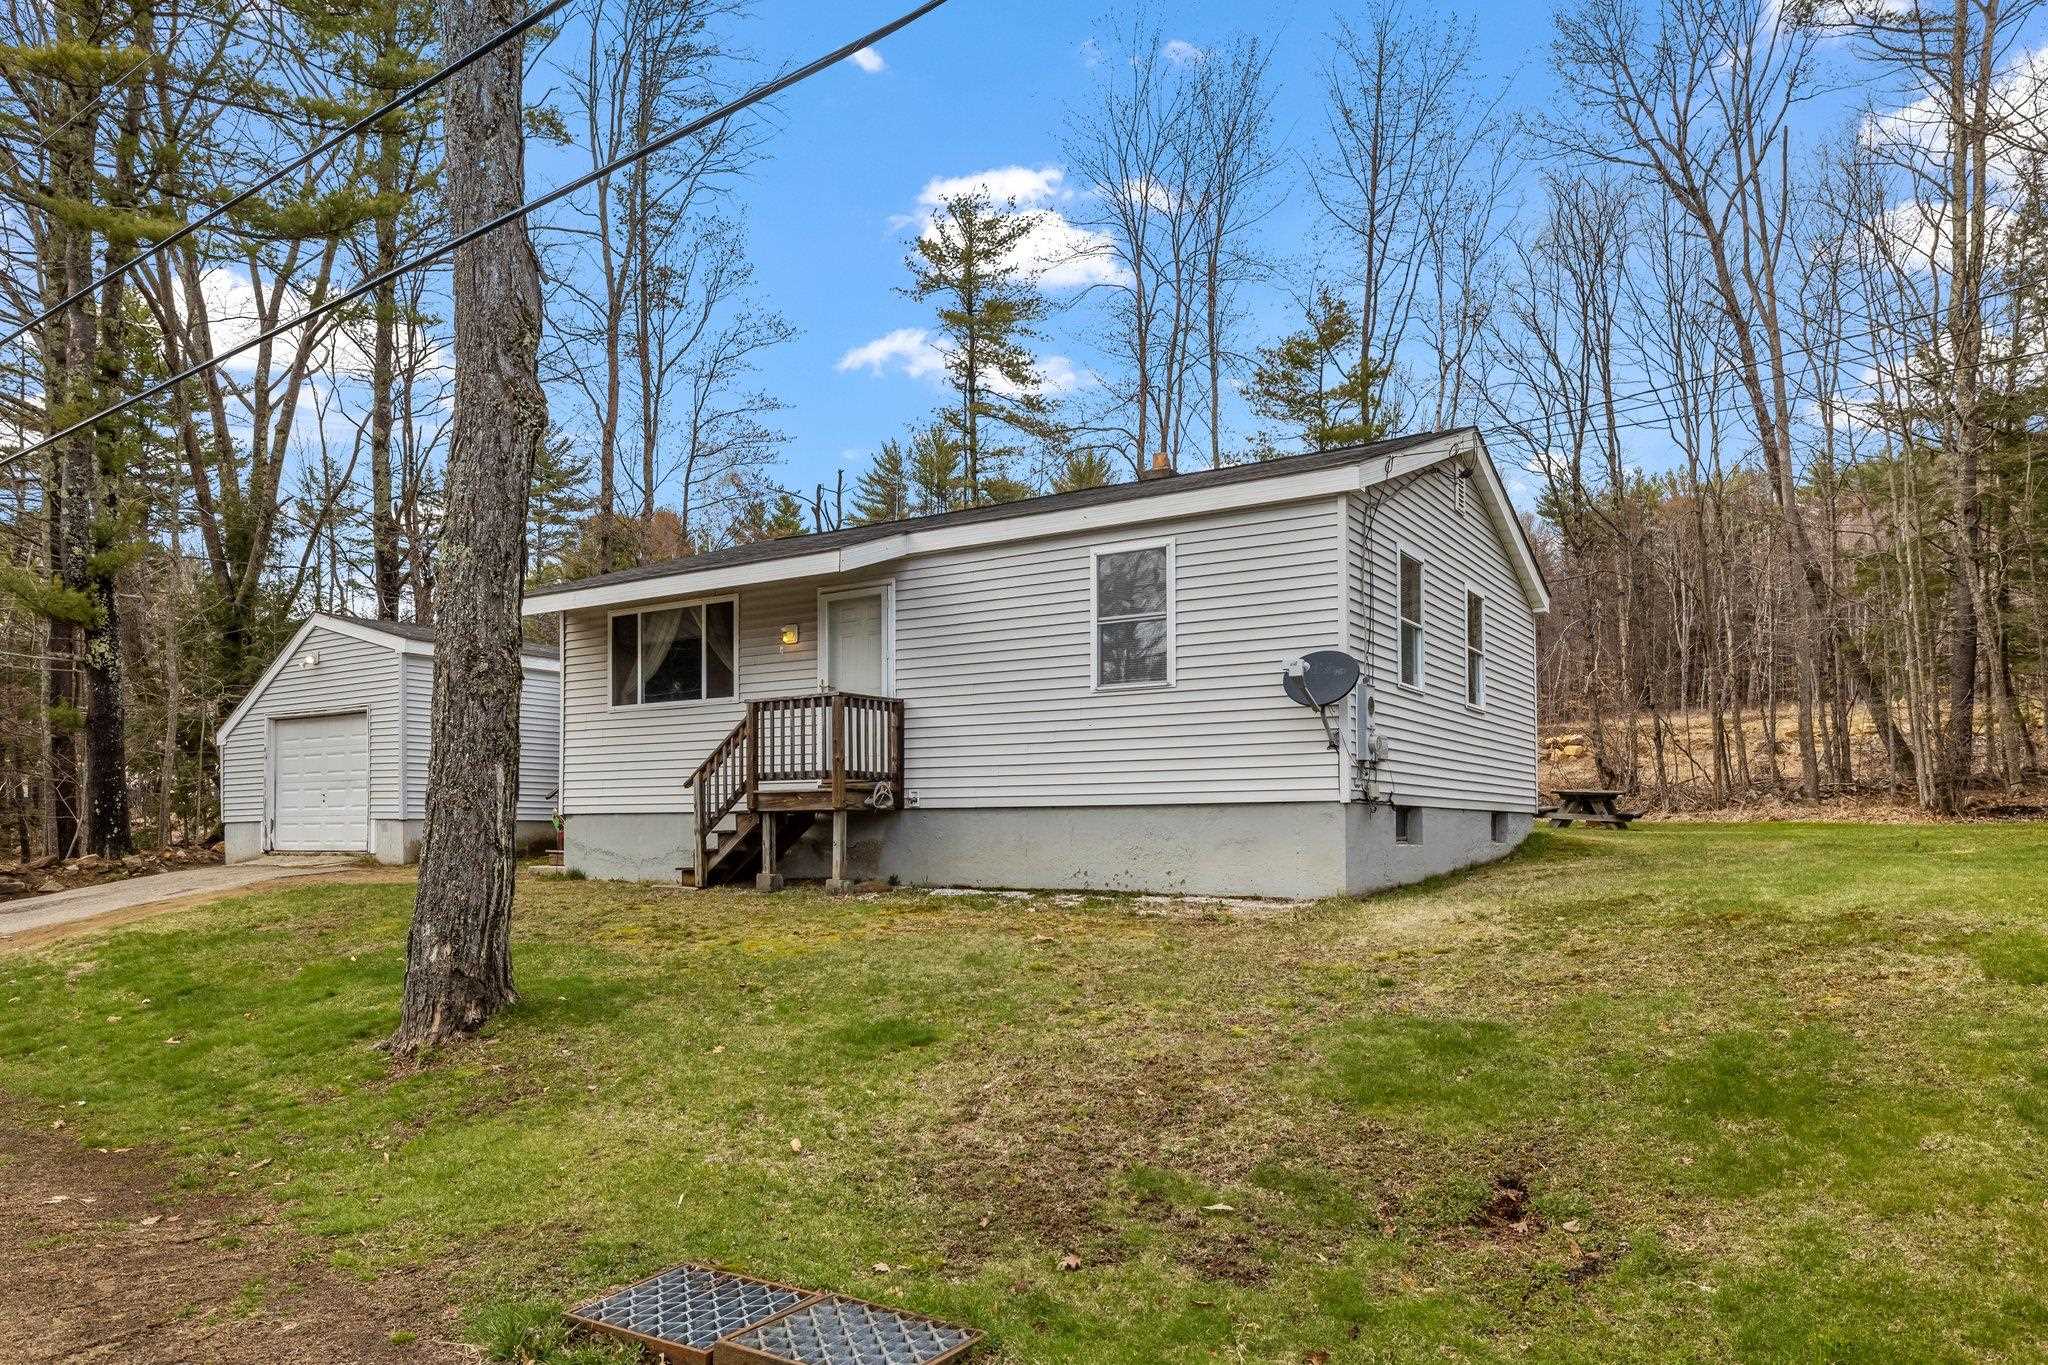 29 Durrell Mountain Road Belmont, NH Photo